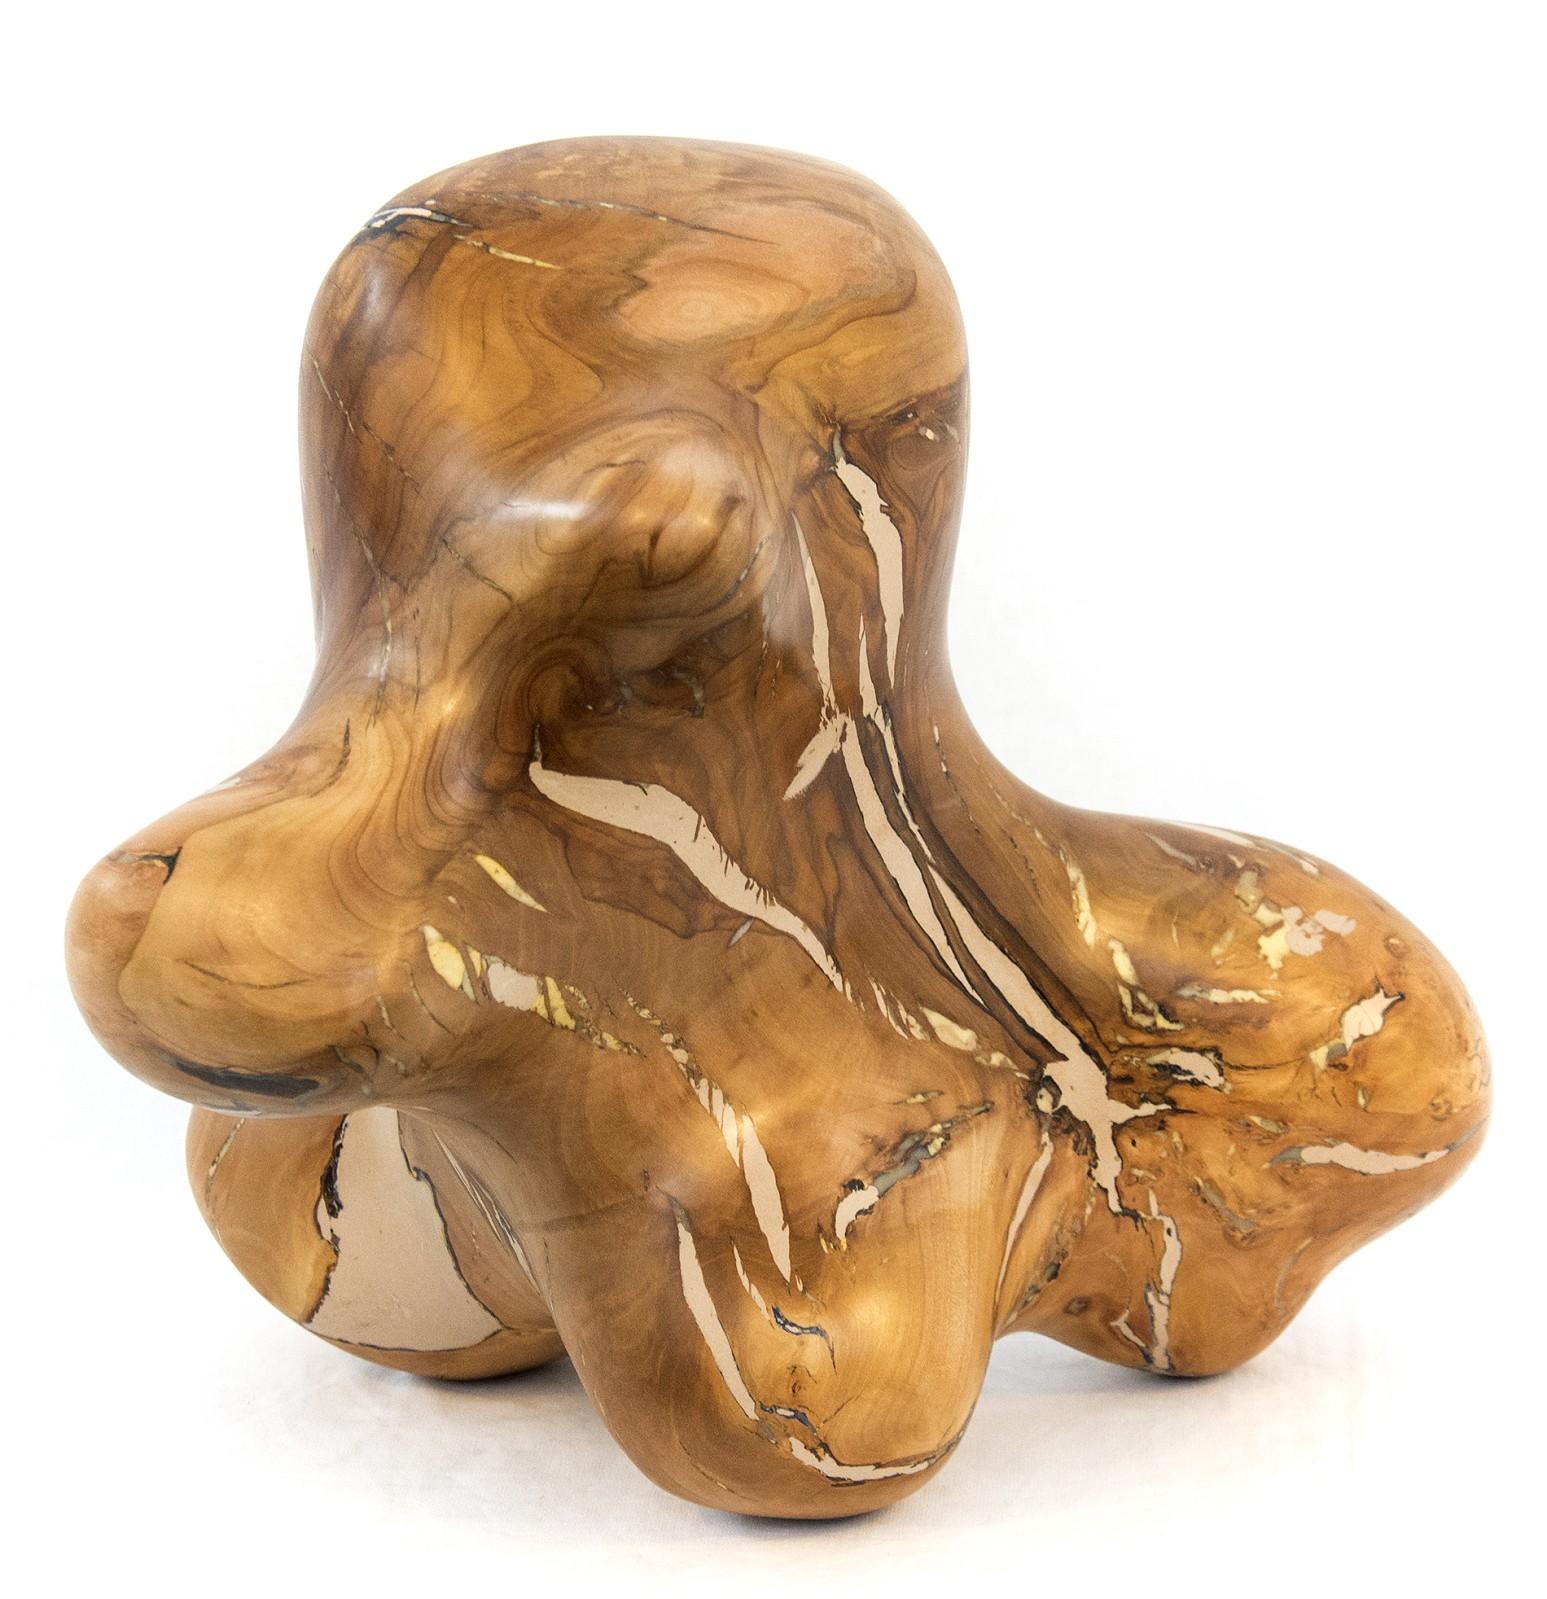 Shayne Dark Abstract Sculpture - Windfall Series No 03 - small, smooth, abstract, natural wood carved sculpture